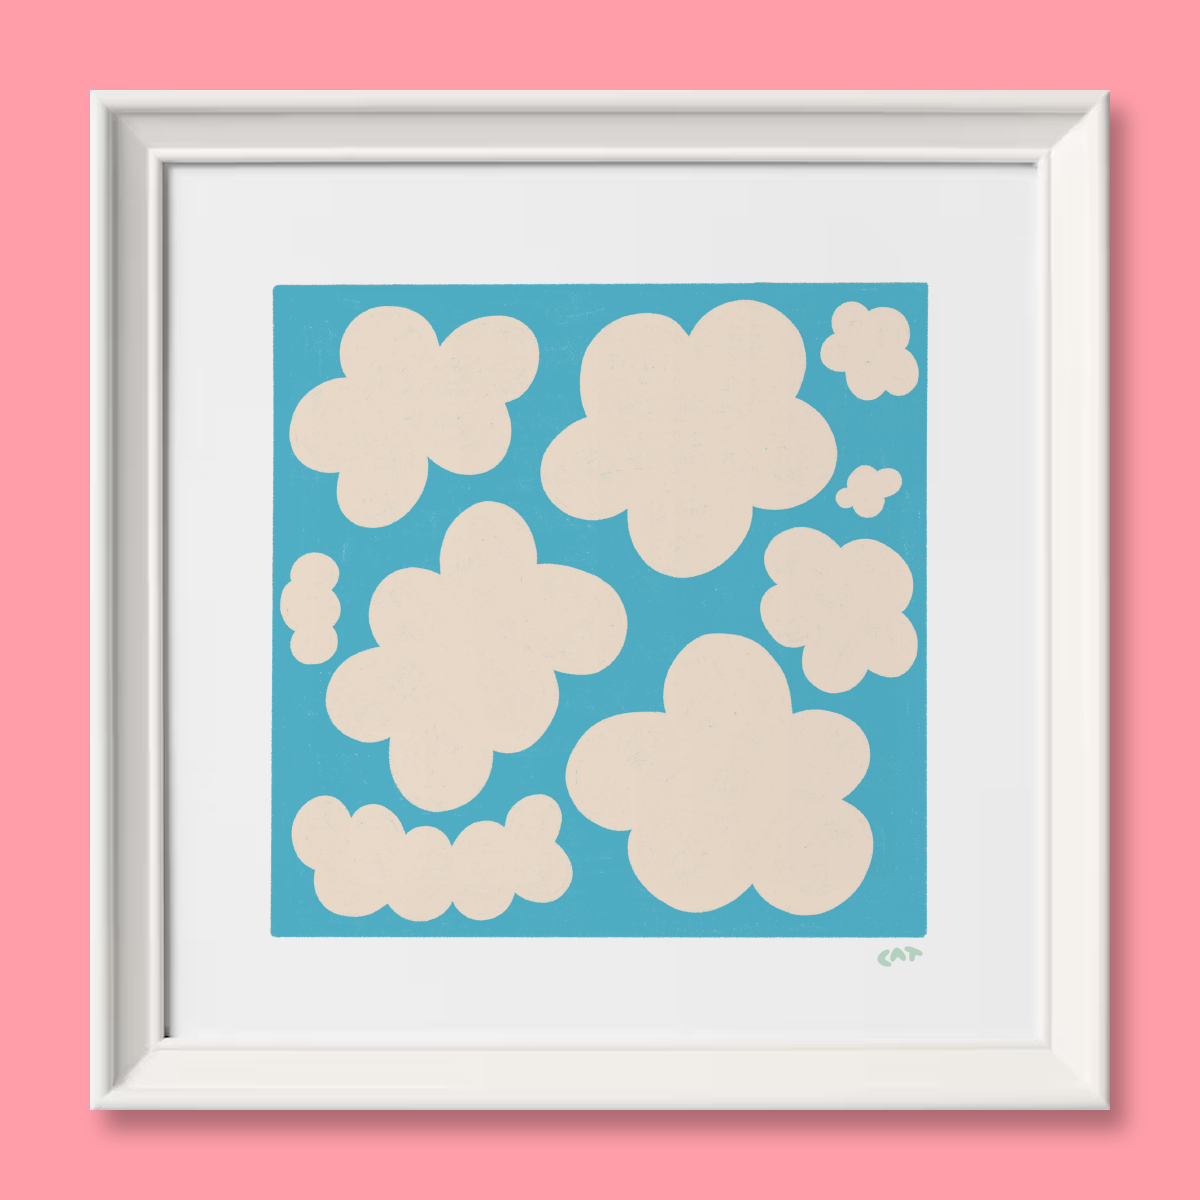 White framed print of a blue square with white cloud-like shapes on top.